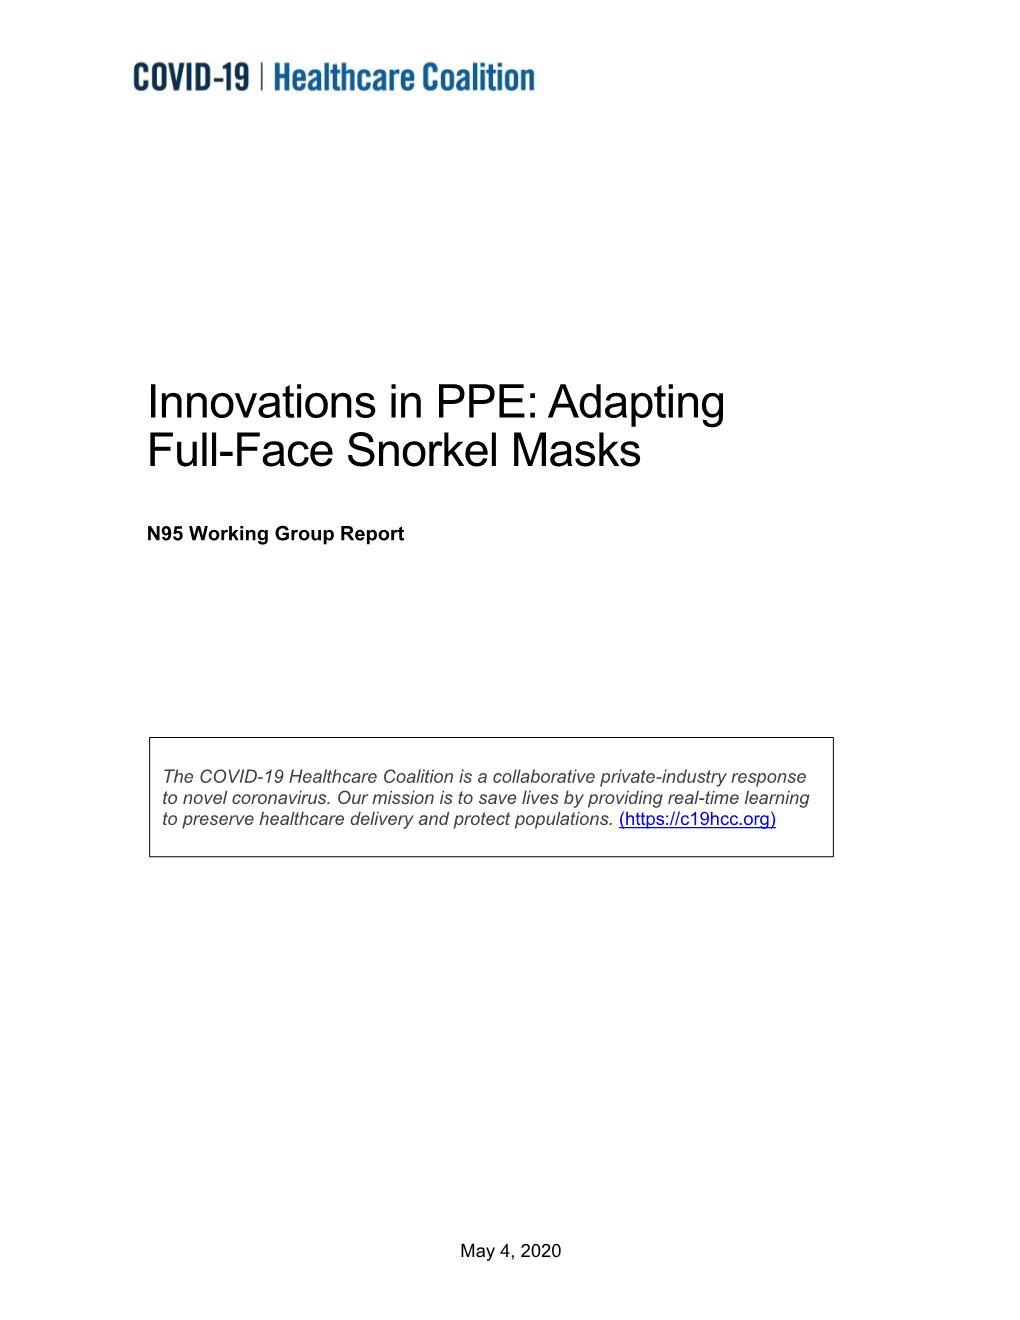 Innovations in PPE: Adapting Full-Face Snorkel Masks